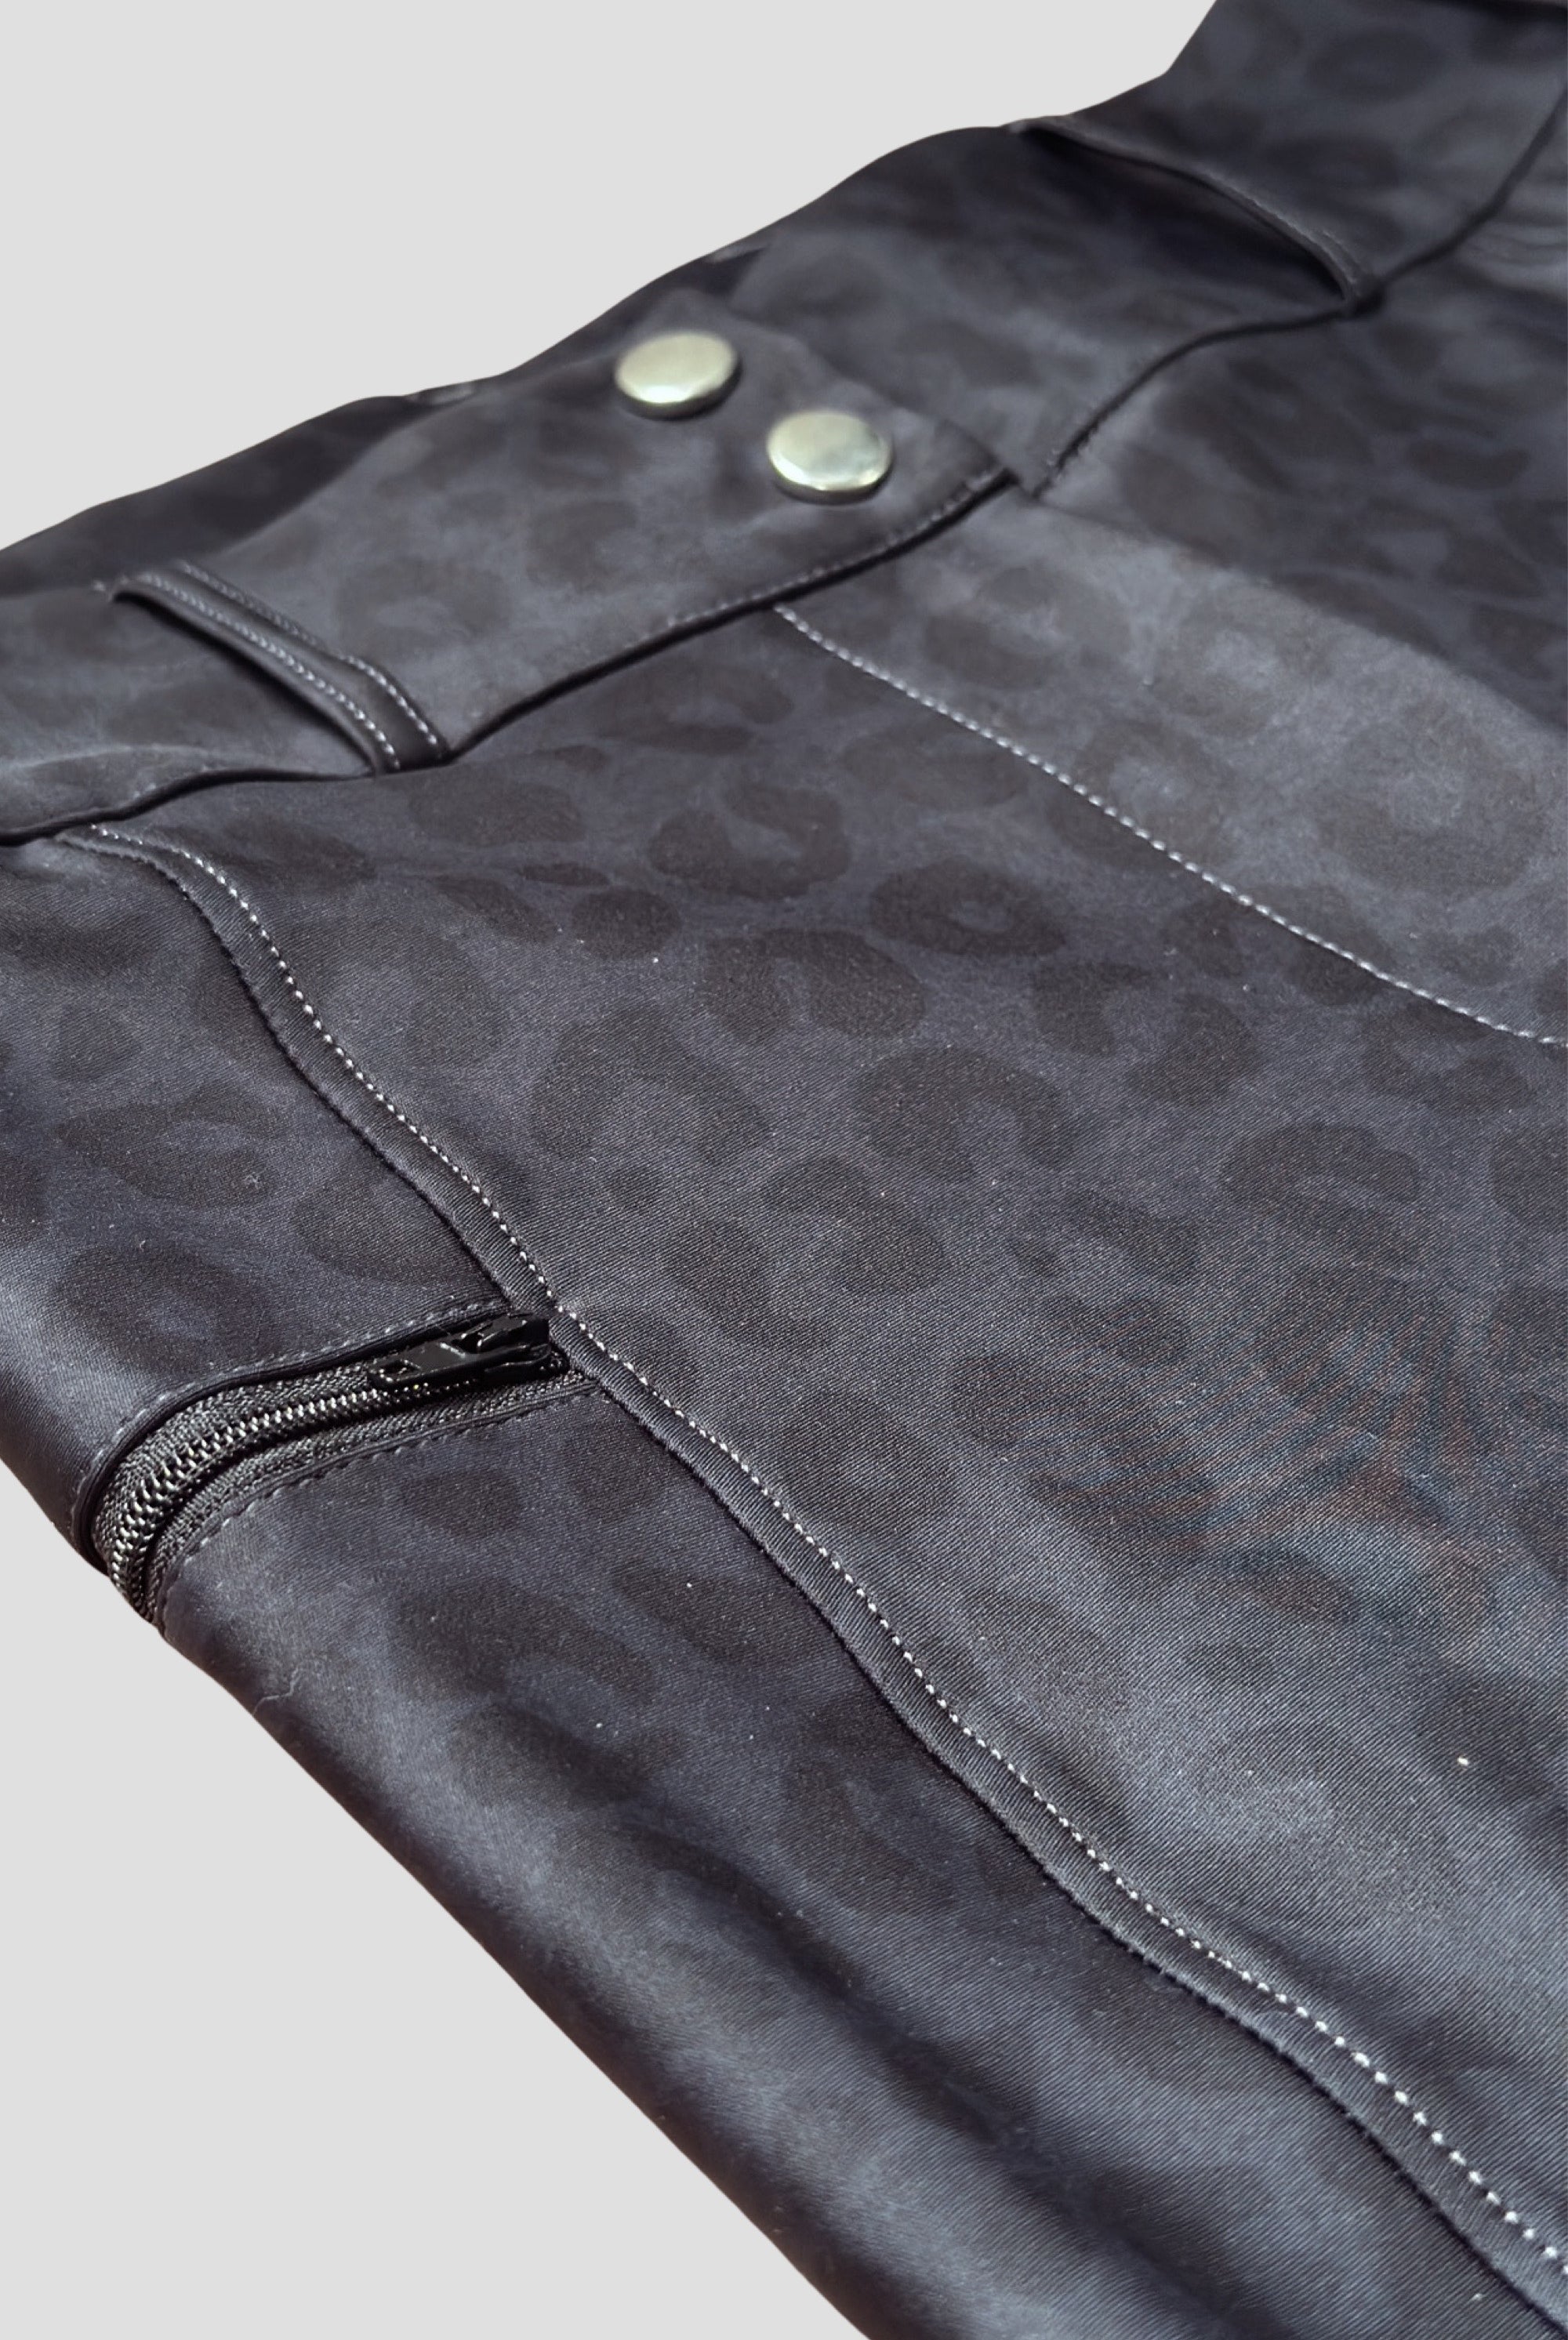 Close-up of a black leather jacket with a subtle leopard print pattern, resembling chic "The Breeches - Black Leopard." The jacket features metal snap buttons, visible white stitching, and a partially open zipper on the left side. The background is plain and light-colored.